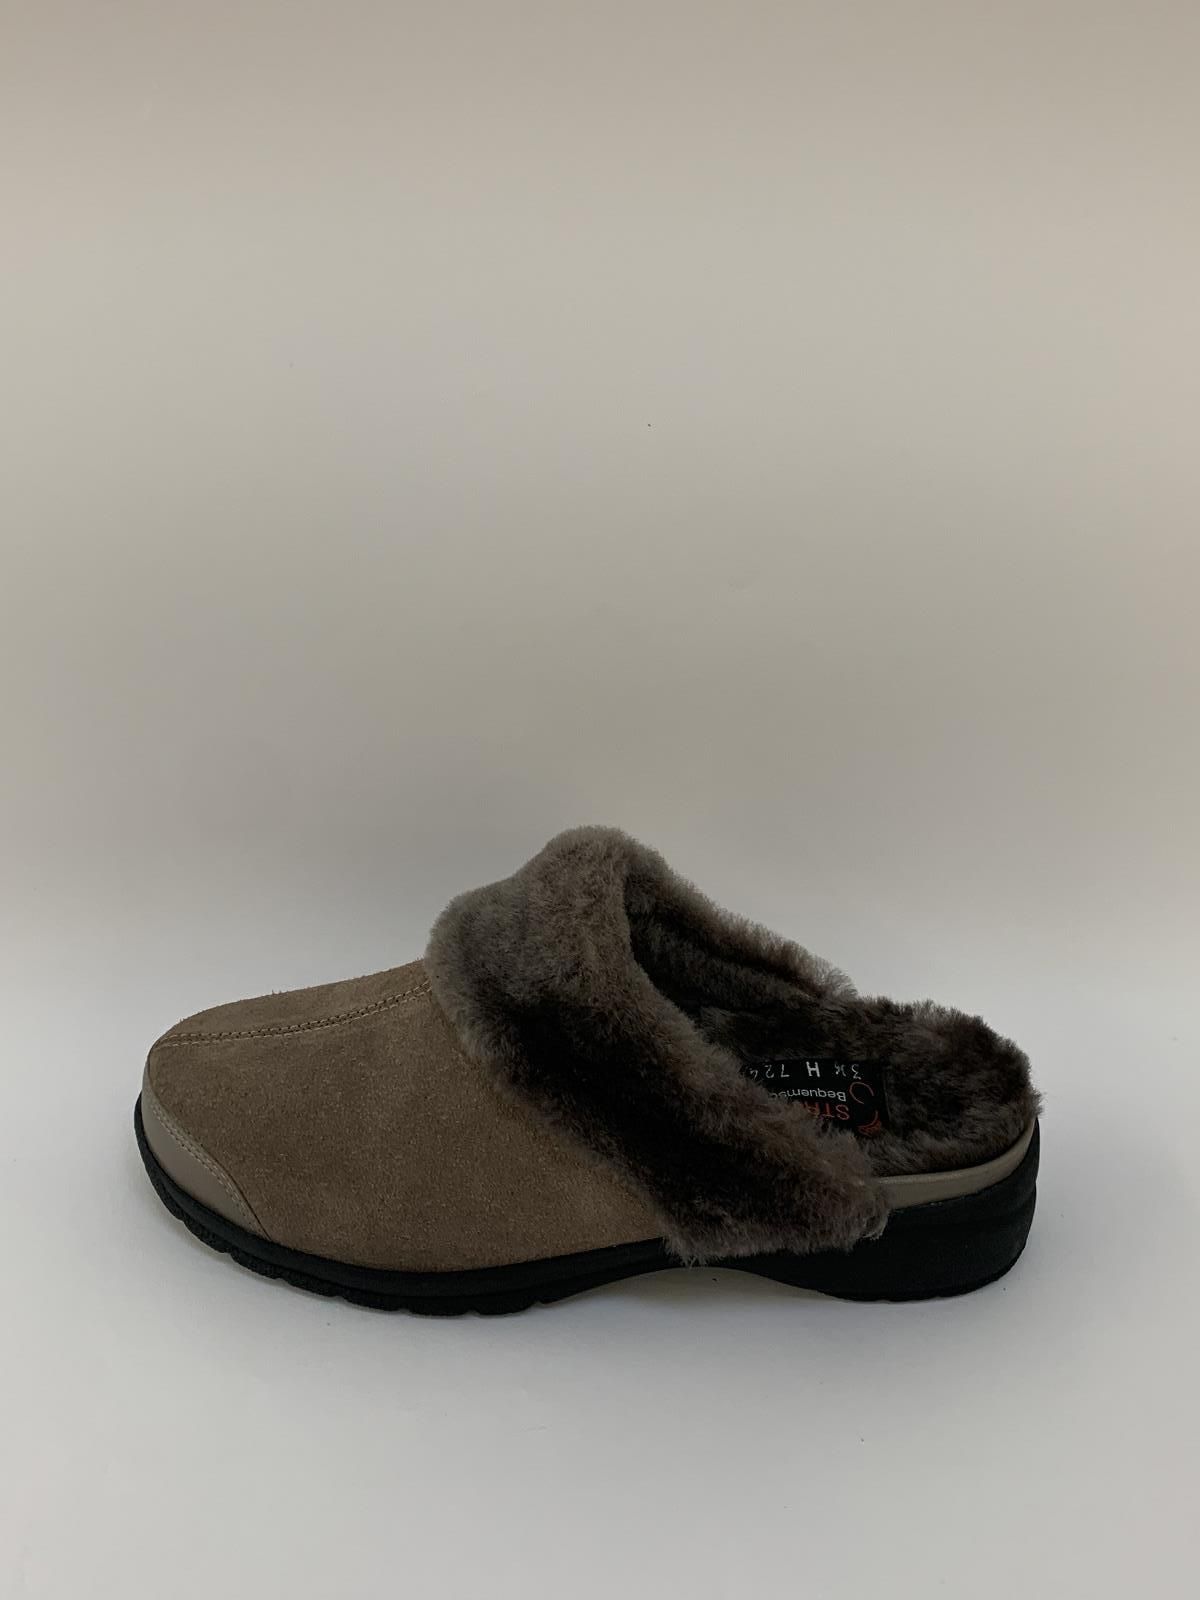 Ströber Pantoffel Taupe dames (Mul  Breed Wol Taupe - Gaby) - Schoenen Luca